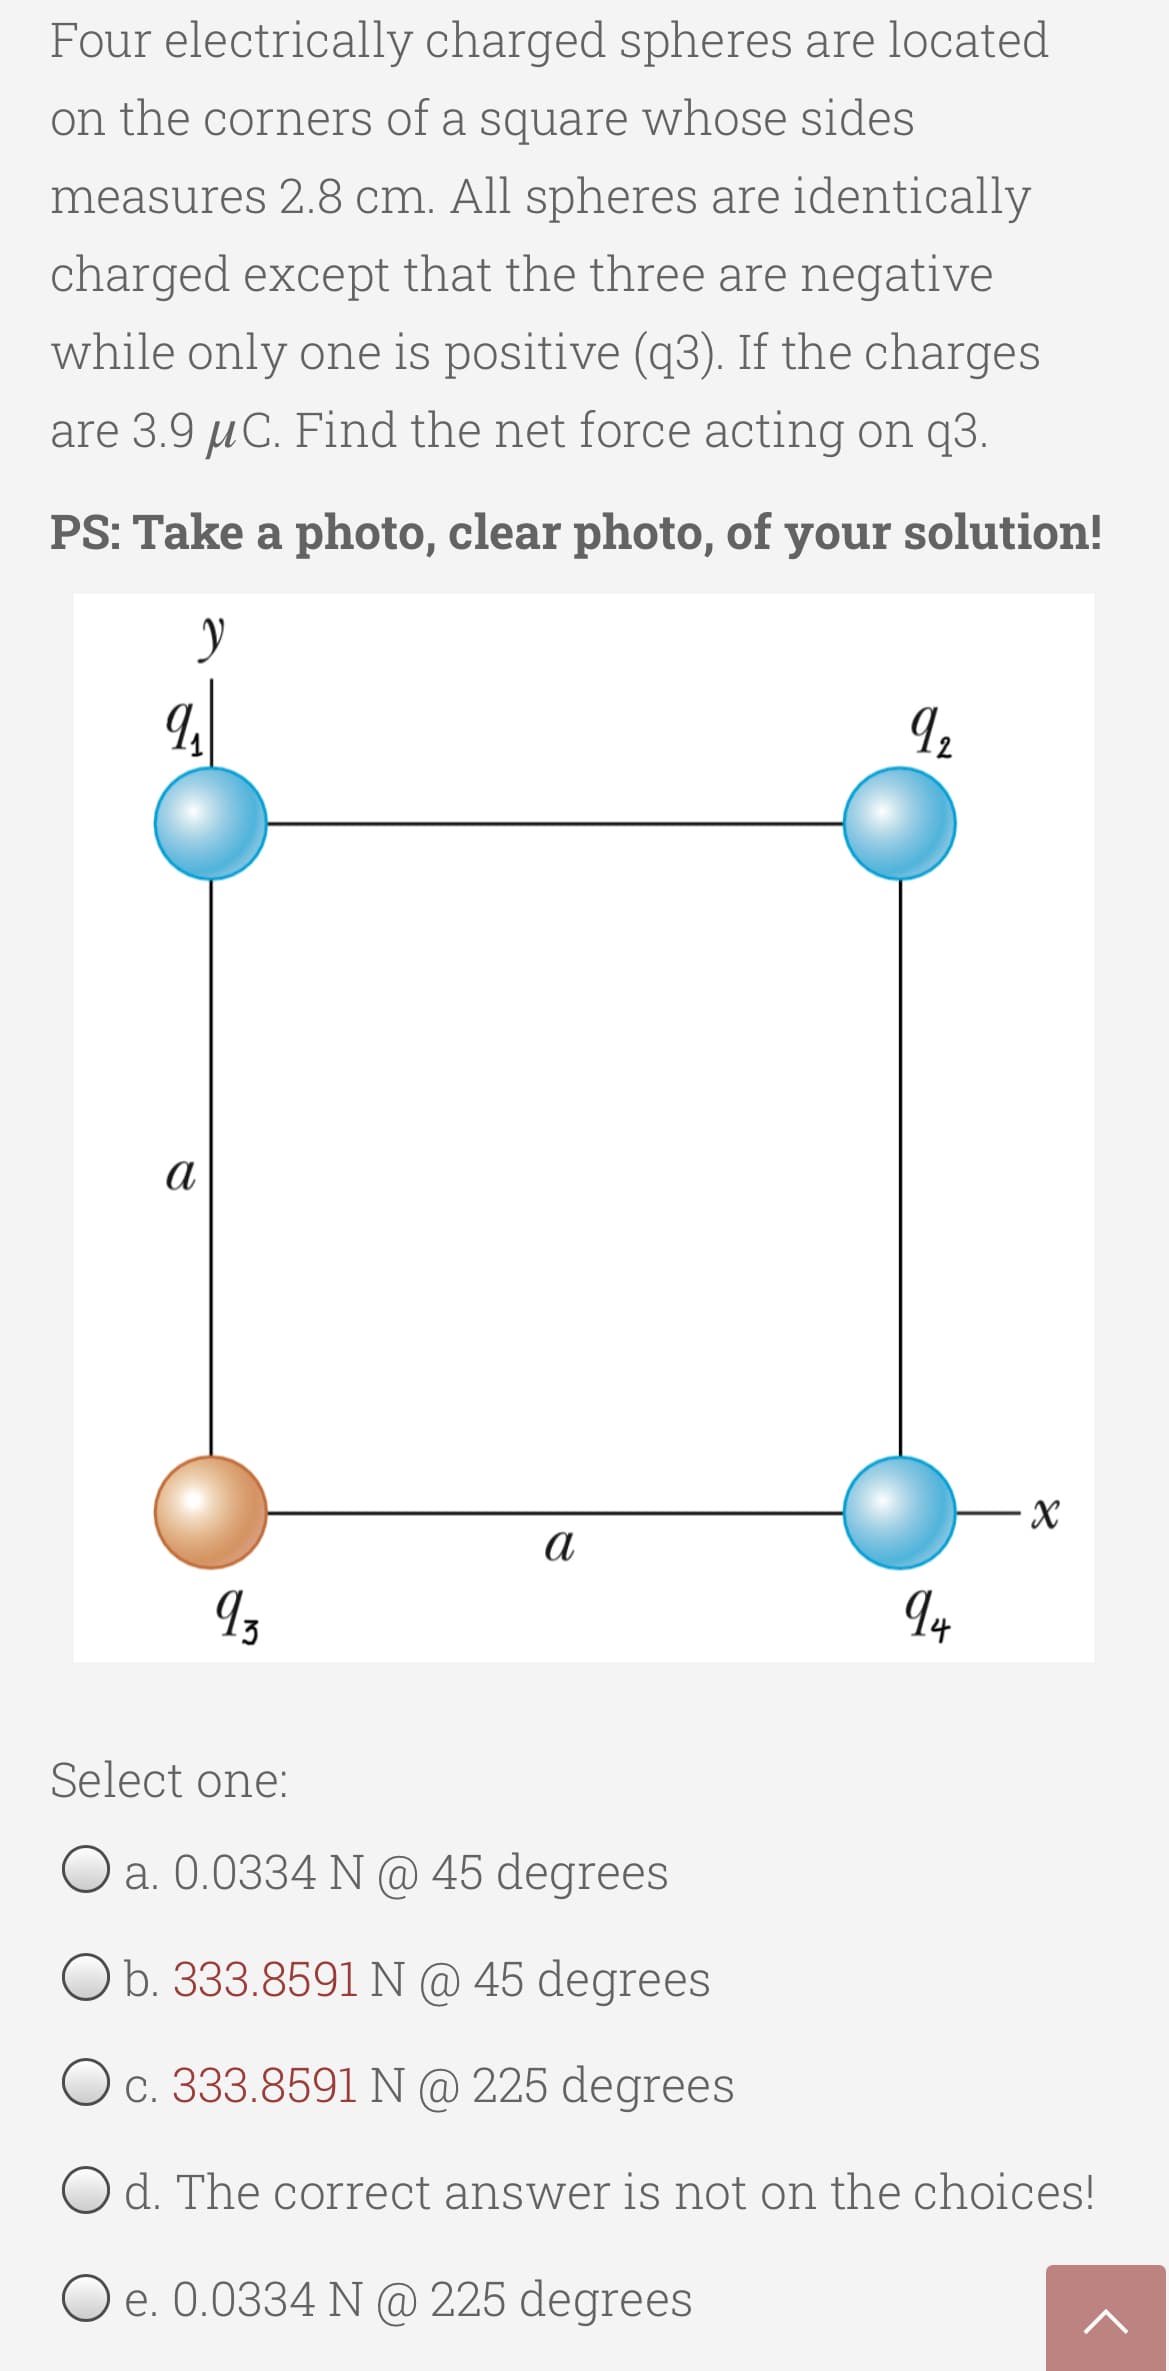 Four electrically charged spheres are located
on the corners of a square whose sides
measures 2.8 cm. All spheres are identically
charged except that the three are negative
while only one is positive (q3). If the charges
are 3.9 µC. Find the net force acting on q3.
PS: Take a photo, clear photo, of your solution!
Iz
а
Select one:
O a. 0.0334 N @ 45 degrees
O b. 333.8591 N @ 45 degrees
c. 333.8591 N @ 225 degrees
O d. The correct answer is not on the choices!
O e. 0.0334 N @ 225 degrees
